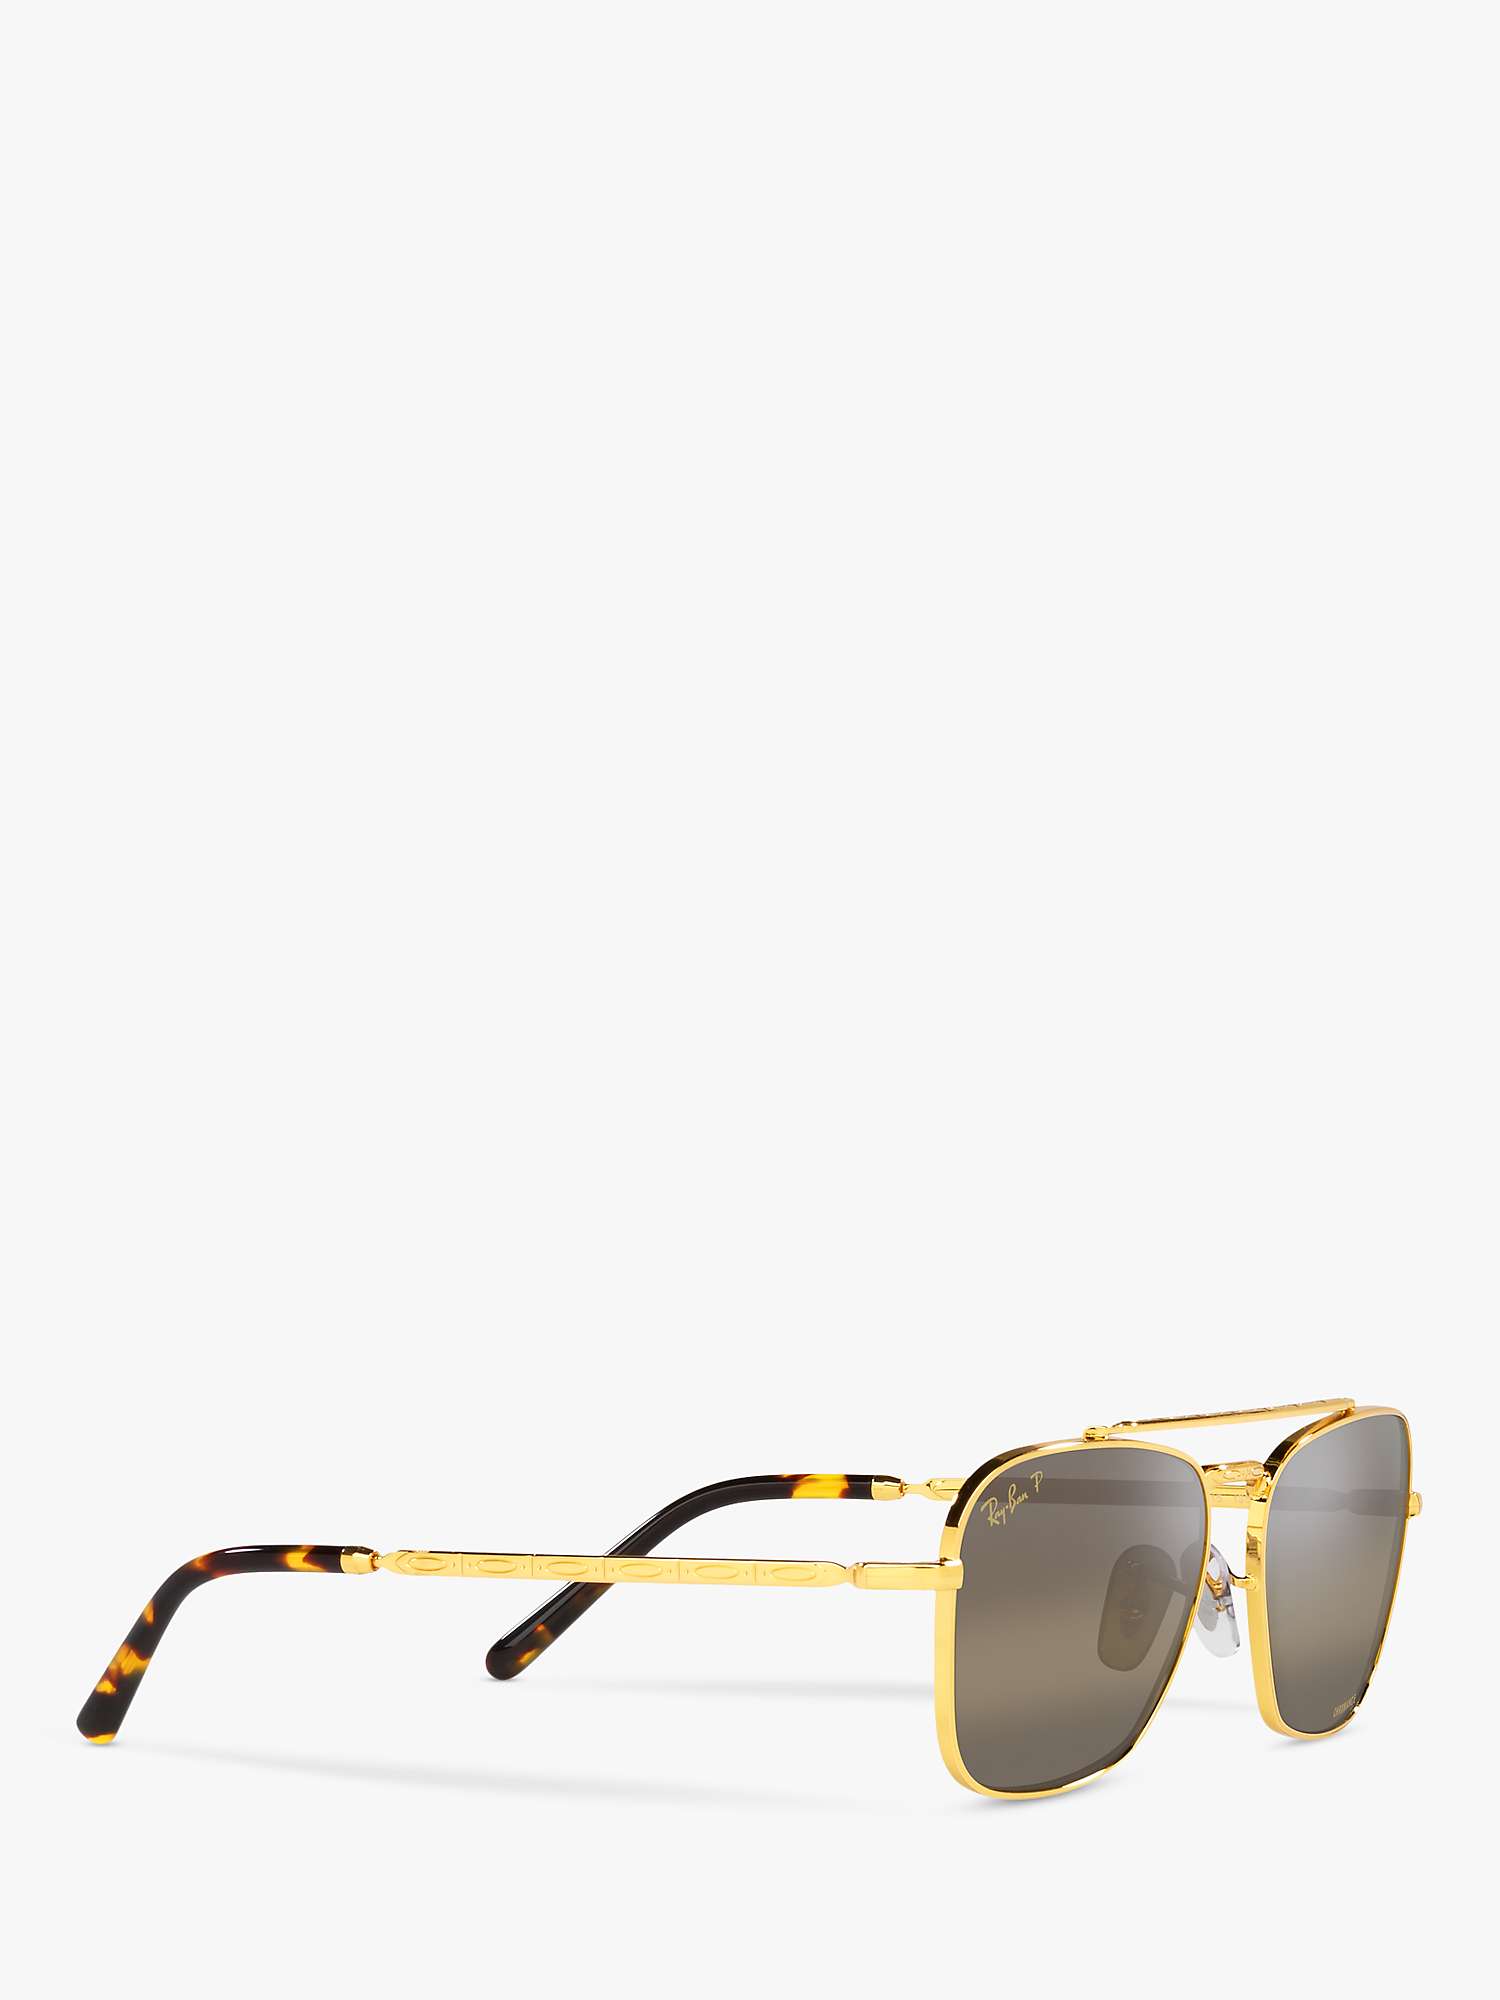 Buy Ray-Ban RB3636 Unisex New Caravan Square Sunglasses, Legend Gold/Brown Online at johnlewis.com